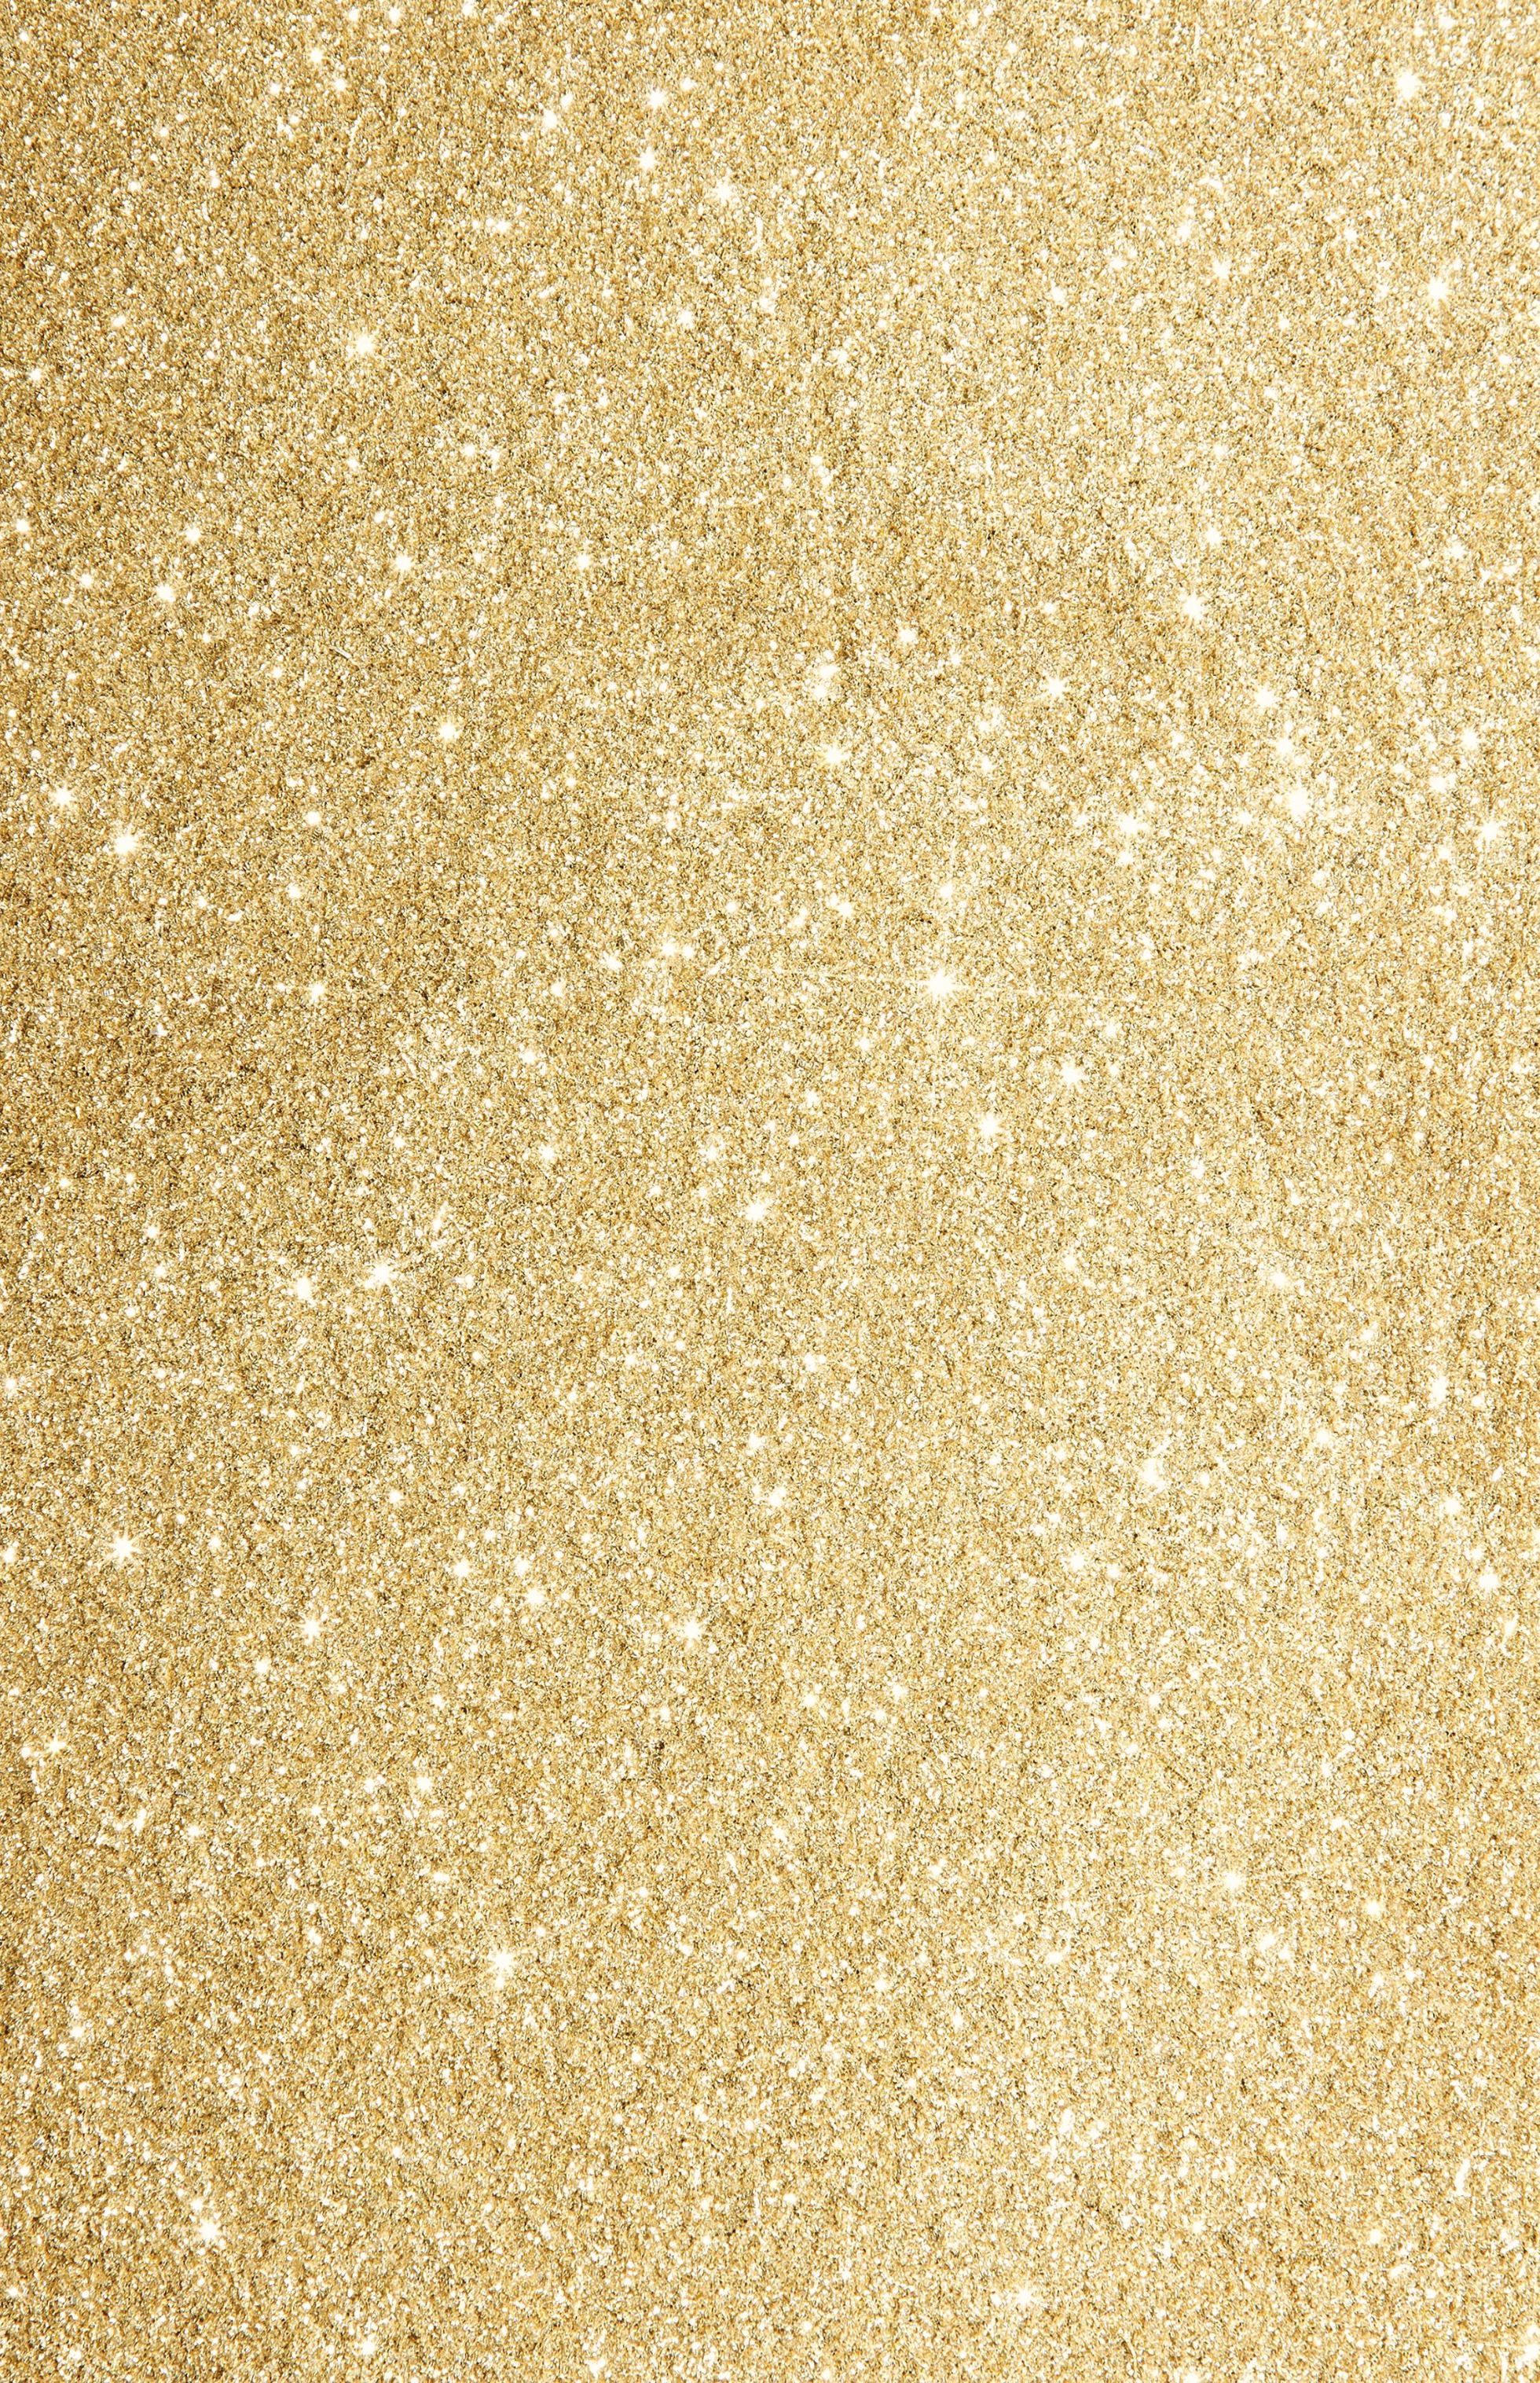 New Years Eve gold wallpaper NY or Xmas Gold. Gold wallpaper, Sparkle wallpaper, Glitter wallpaper